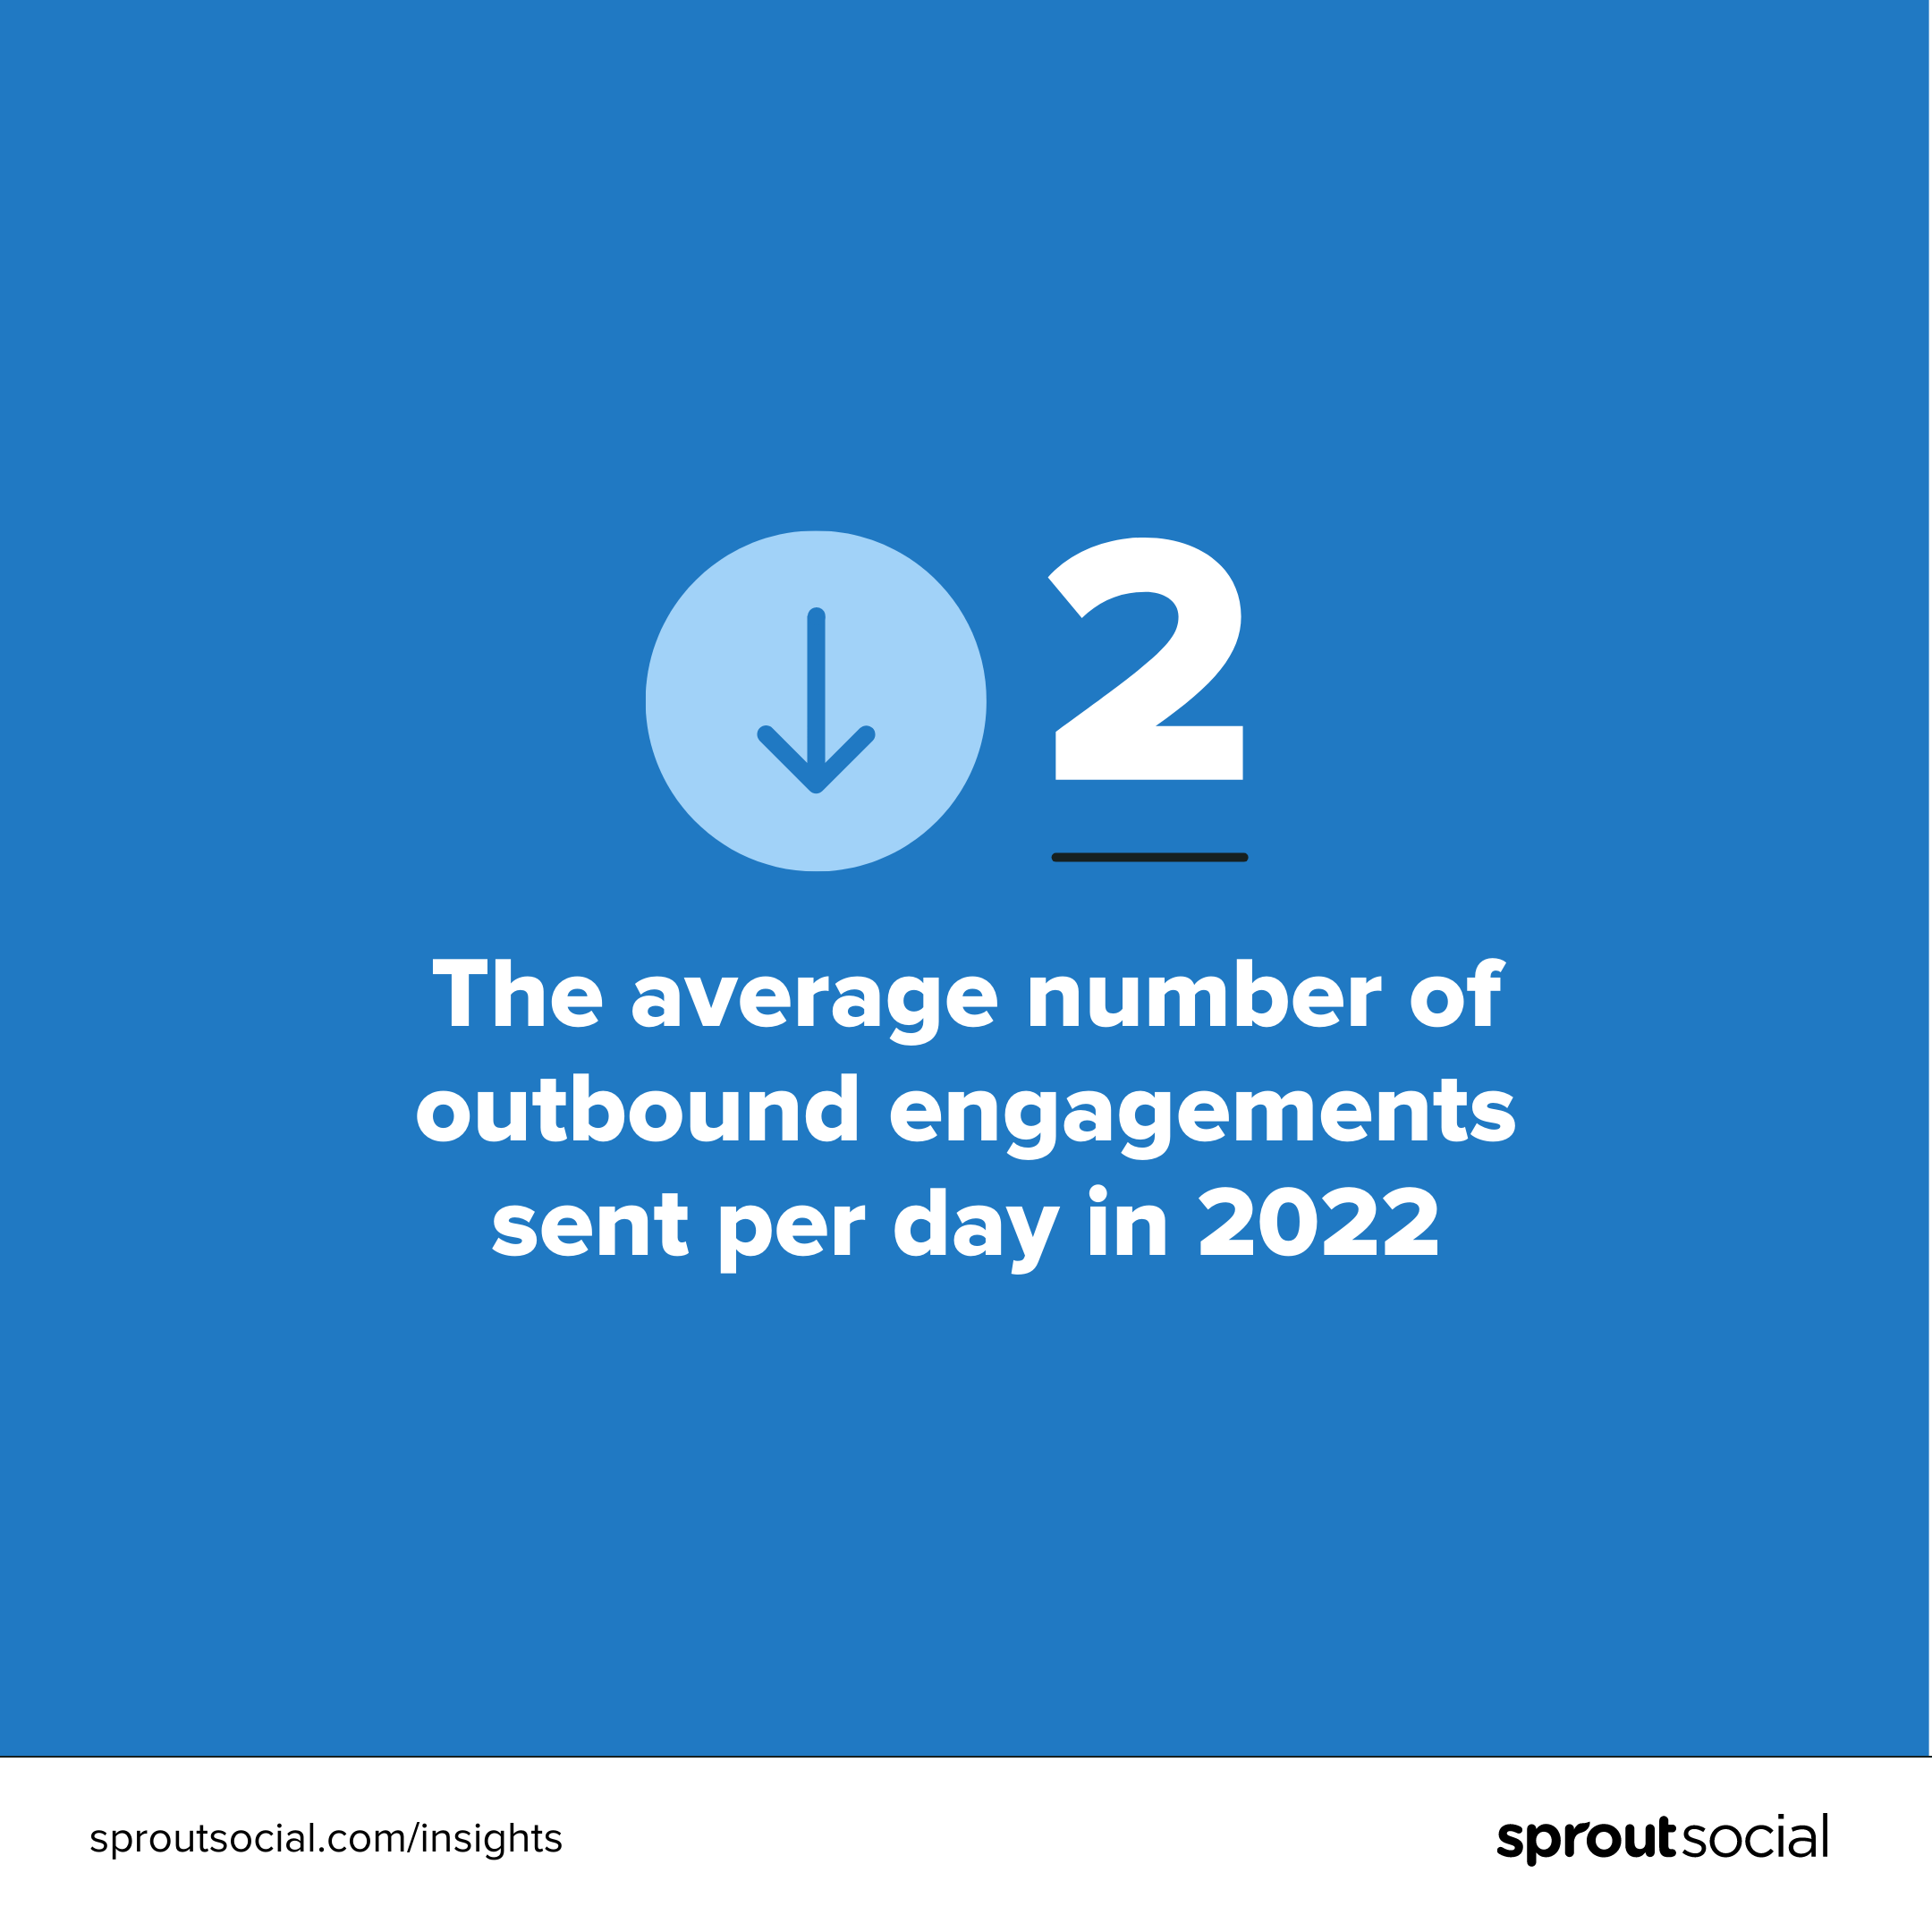 A data visualization that shows the average number of outbound engagements sent per day in 2022 (2).